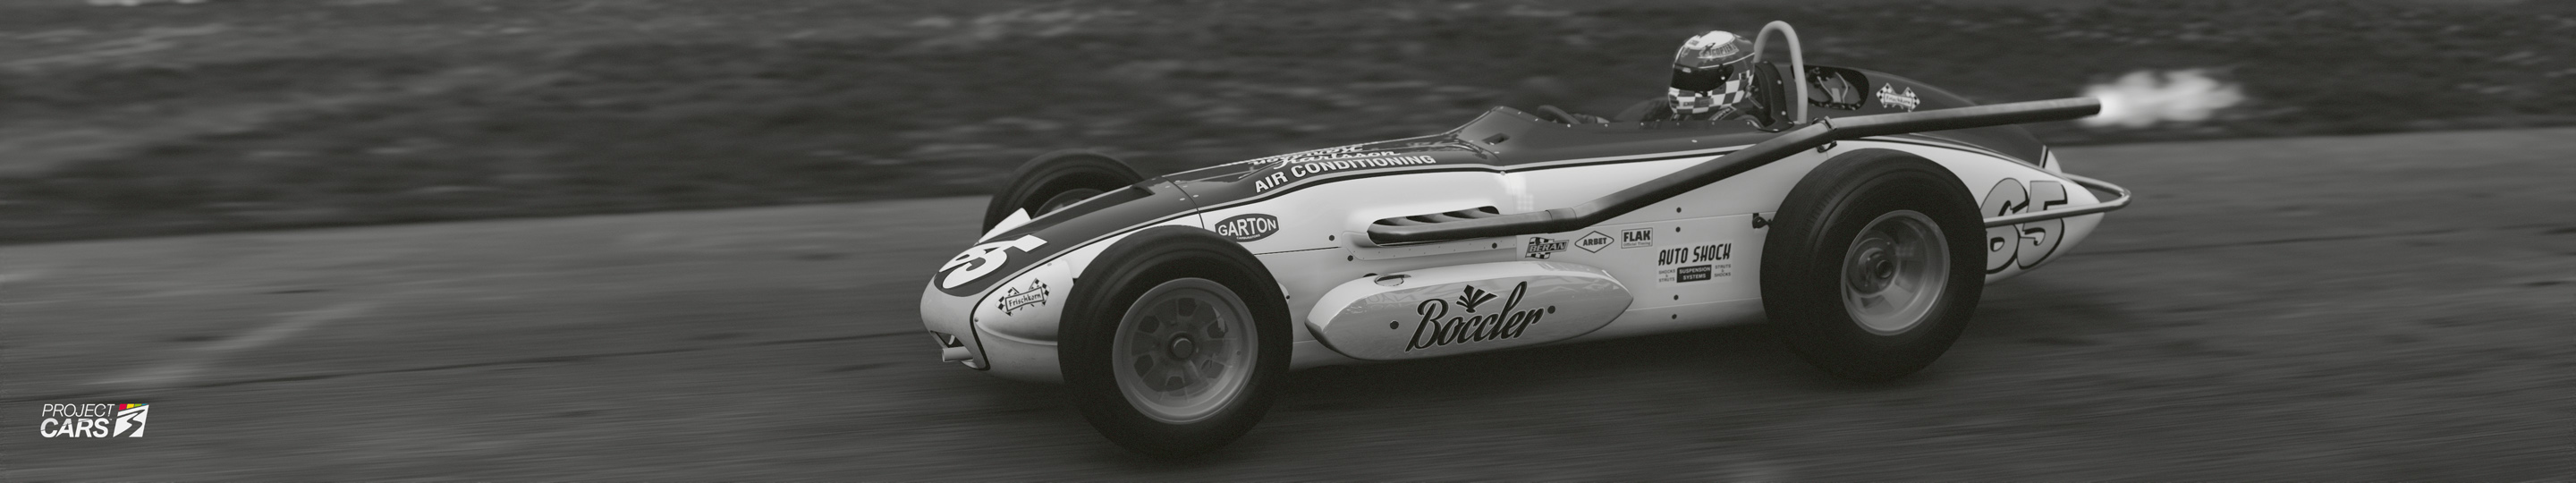 4 PROJECT CARS 3 WATSON ROADSTER at MONZA HISTORIC copy.jpg